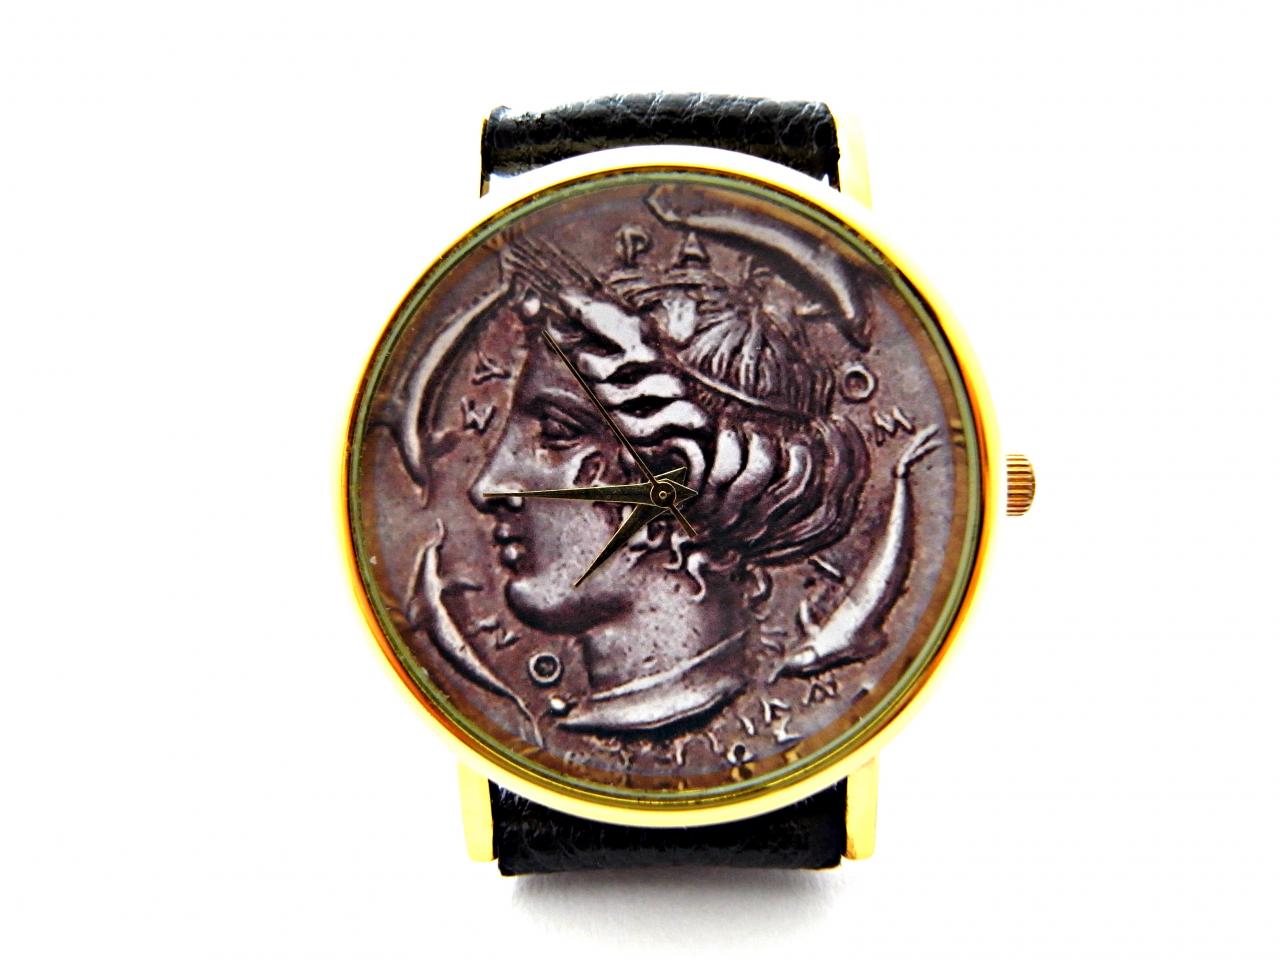 Antique Coin, Old Coin Leather Wrist Watch, Woman Man Lady Unisex Watch, Genuine Leather Handmade Unique Watch #114